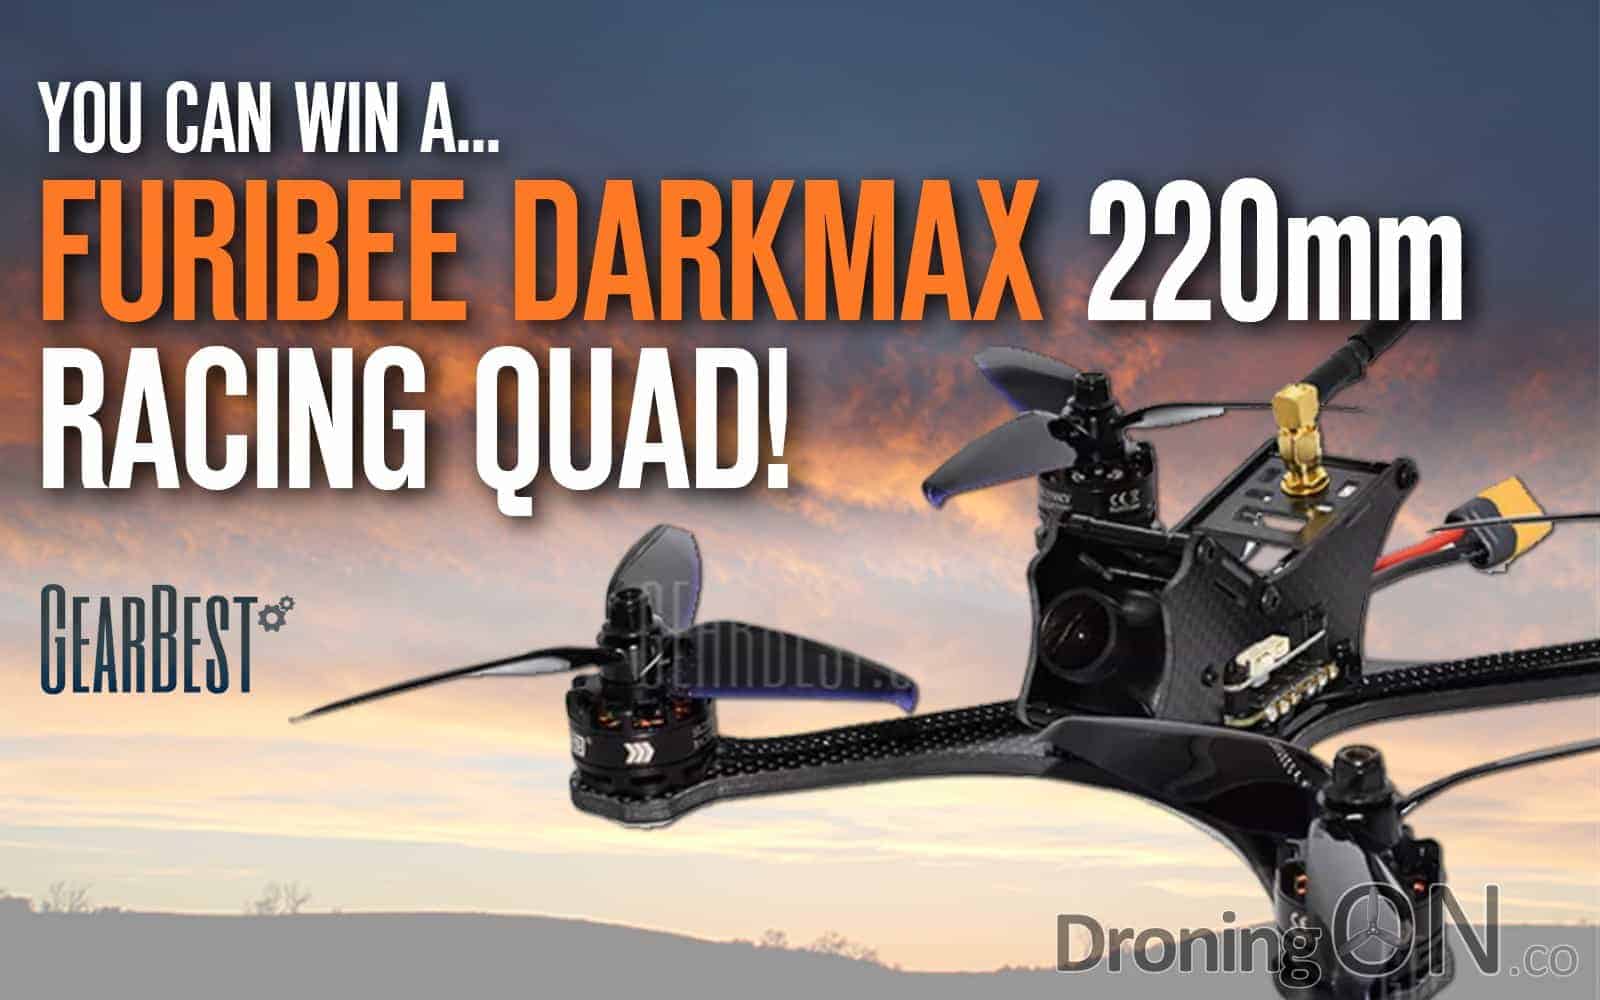 DroningON Exclusive Giveaway for the Furibee DarkMax 220mm racing quadcopter.